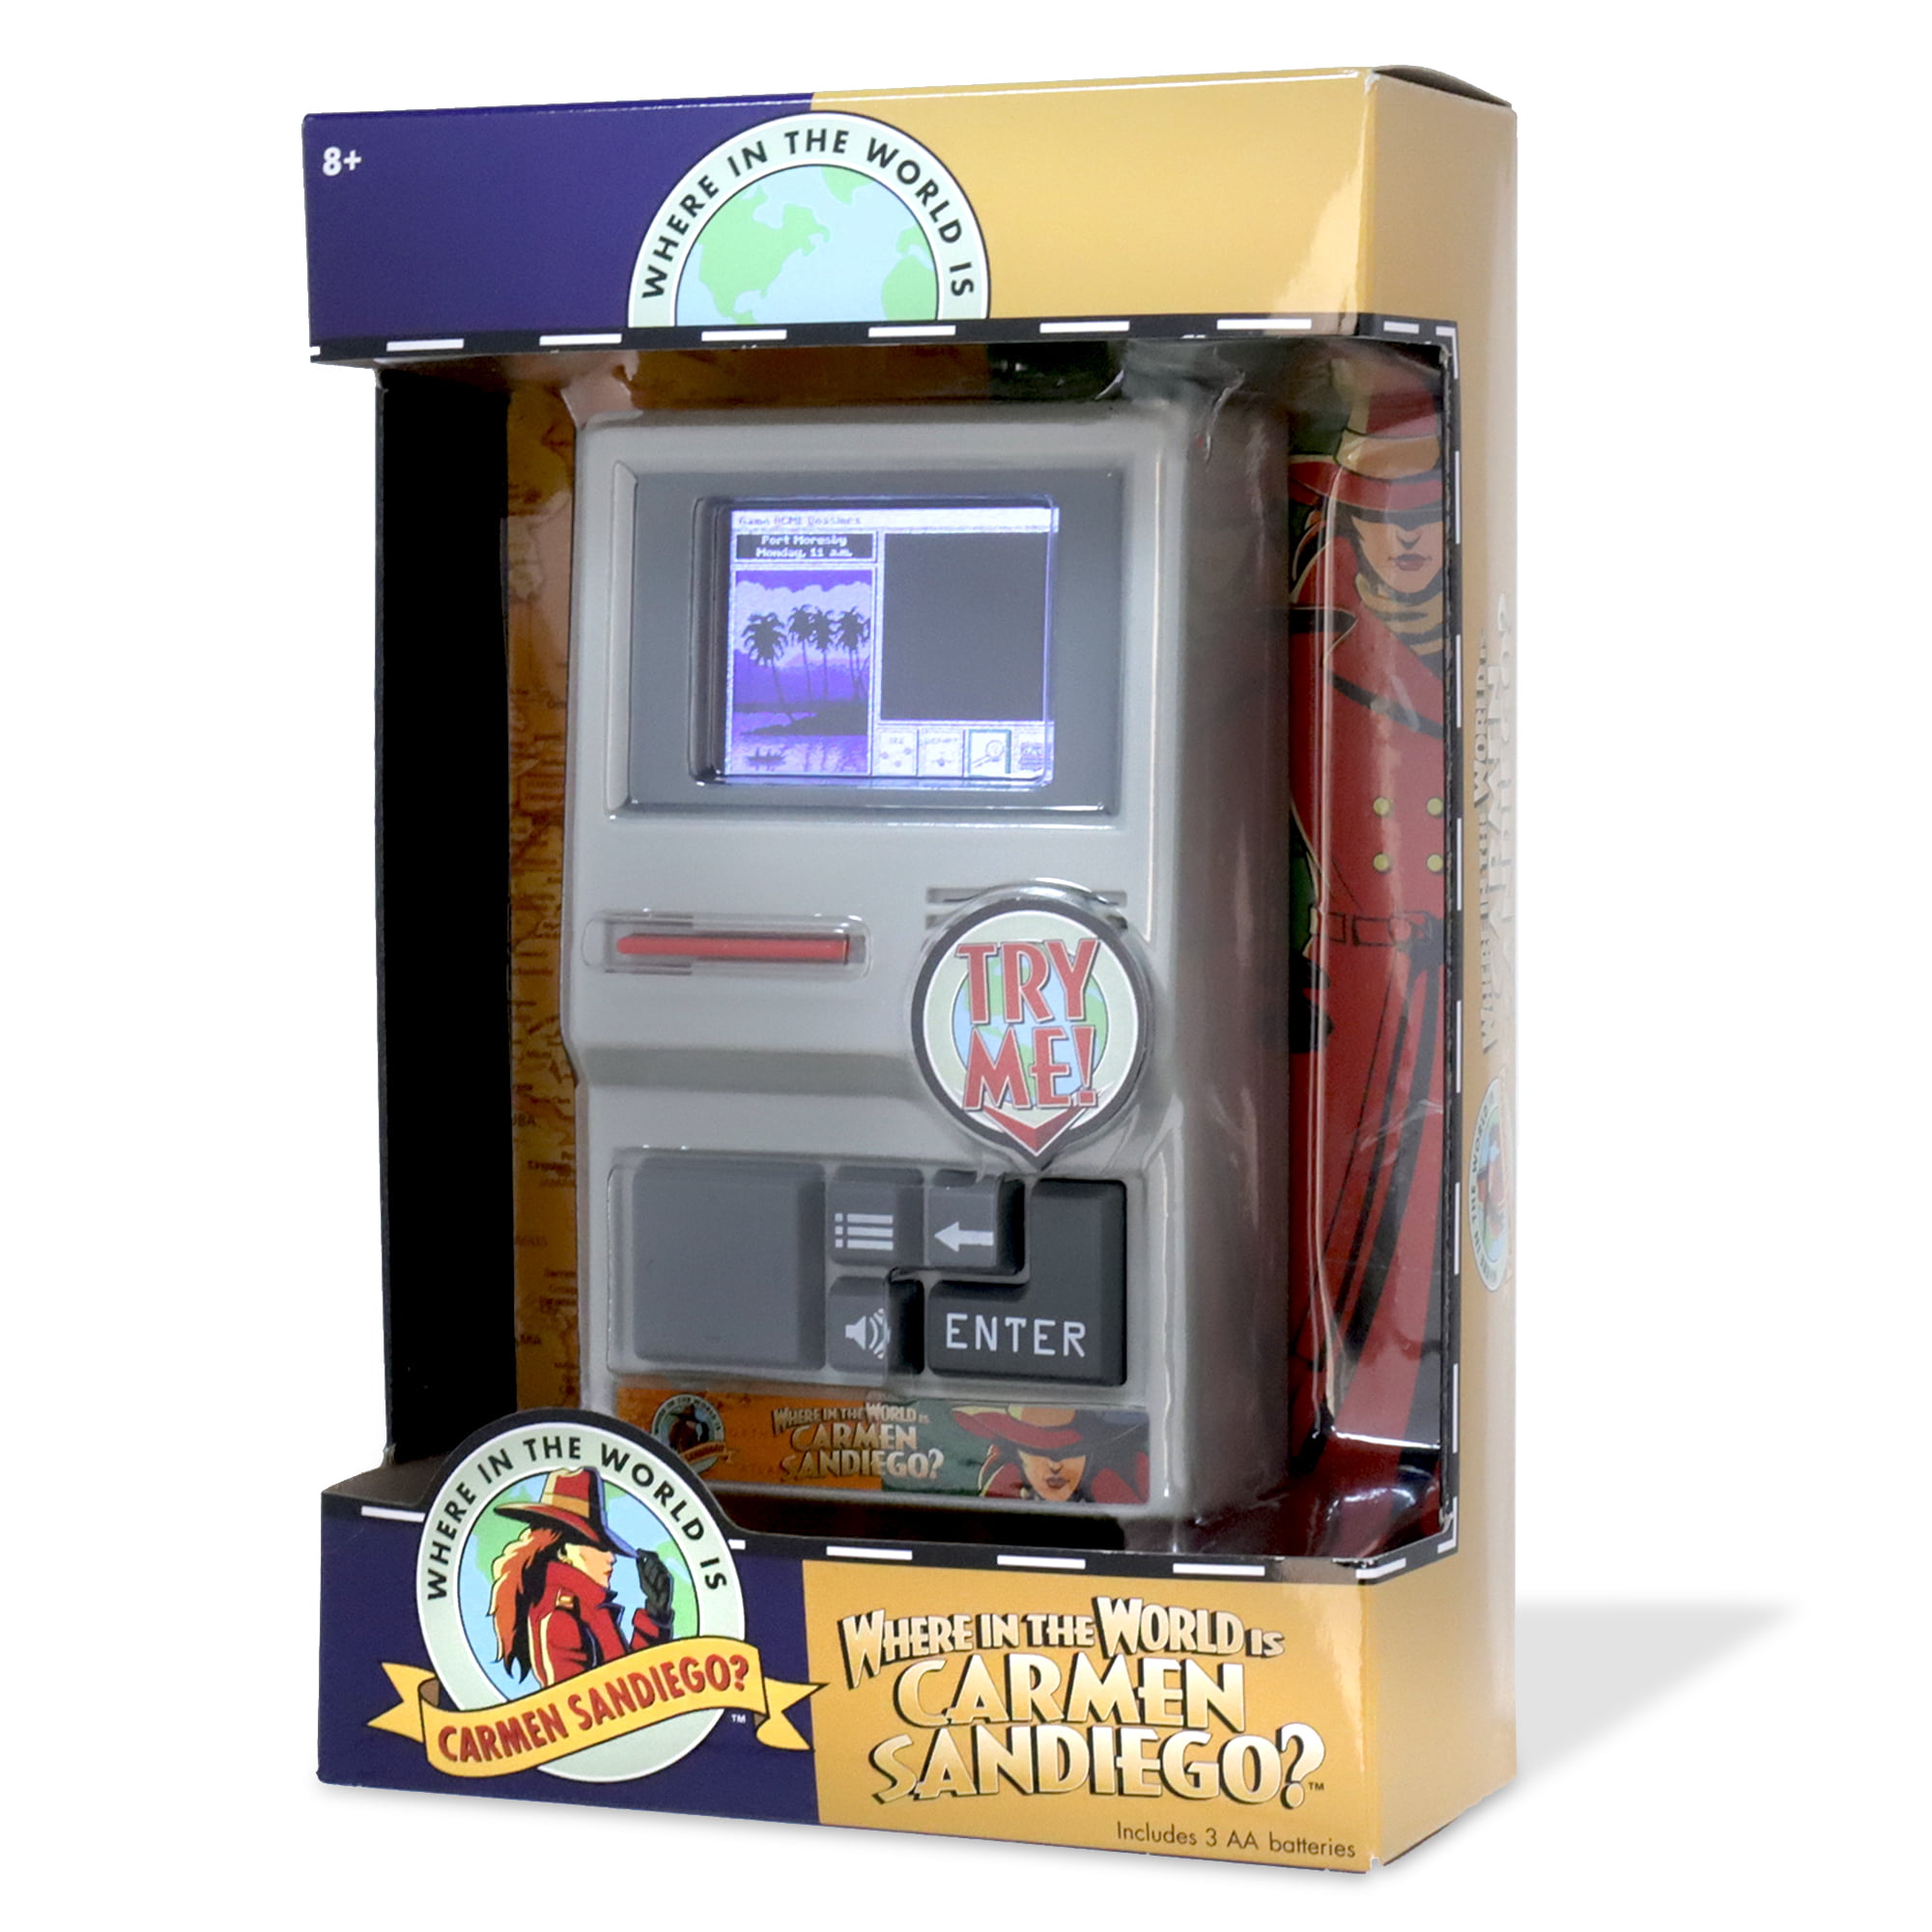 09613 for sale online Basic Fun Where in The World Is Carmen Sandiego Handheld Electronic Game 